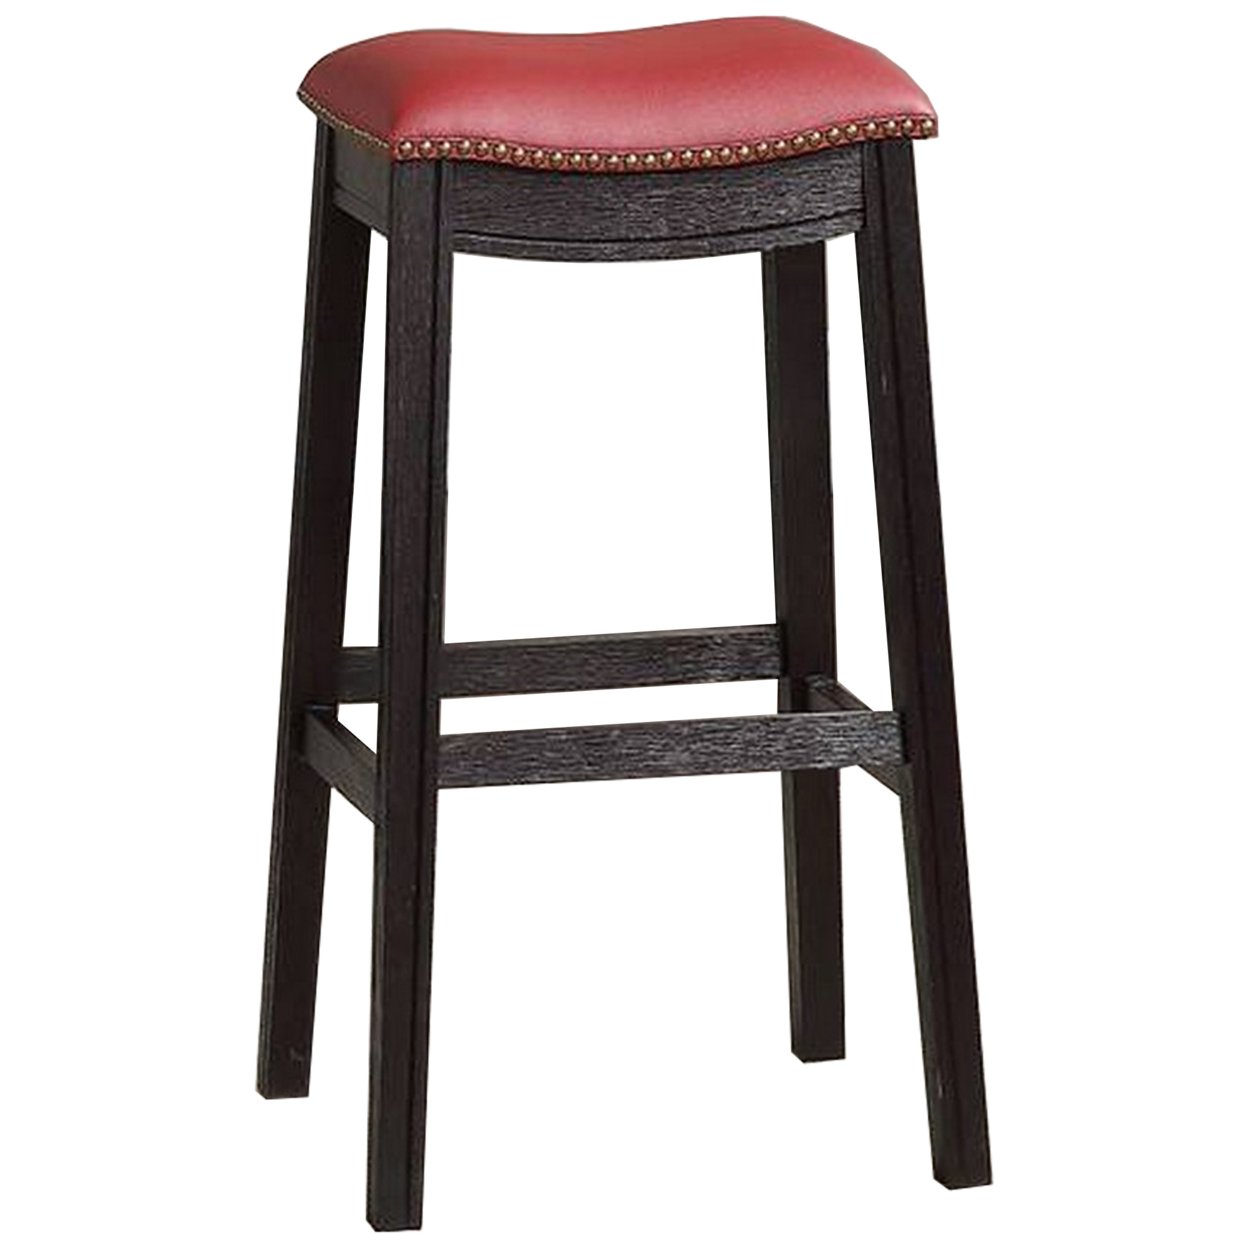 29 Inch Wooden Bar Stool With Upholstered Cushion Seat, Gray And Red- Saltoro Sherpi